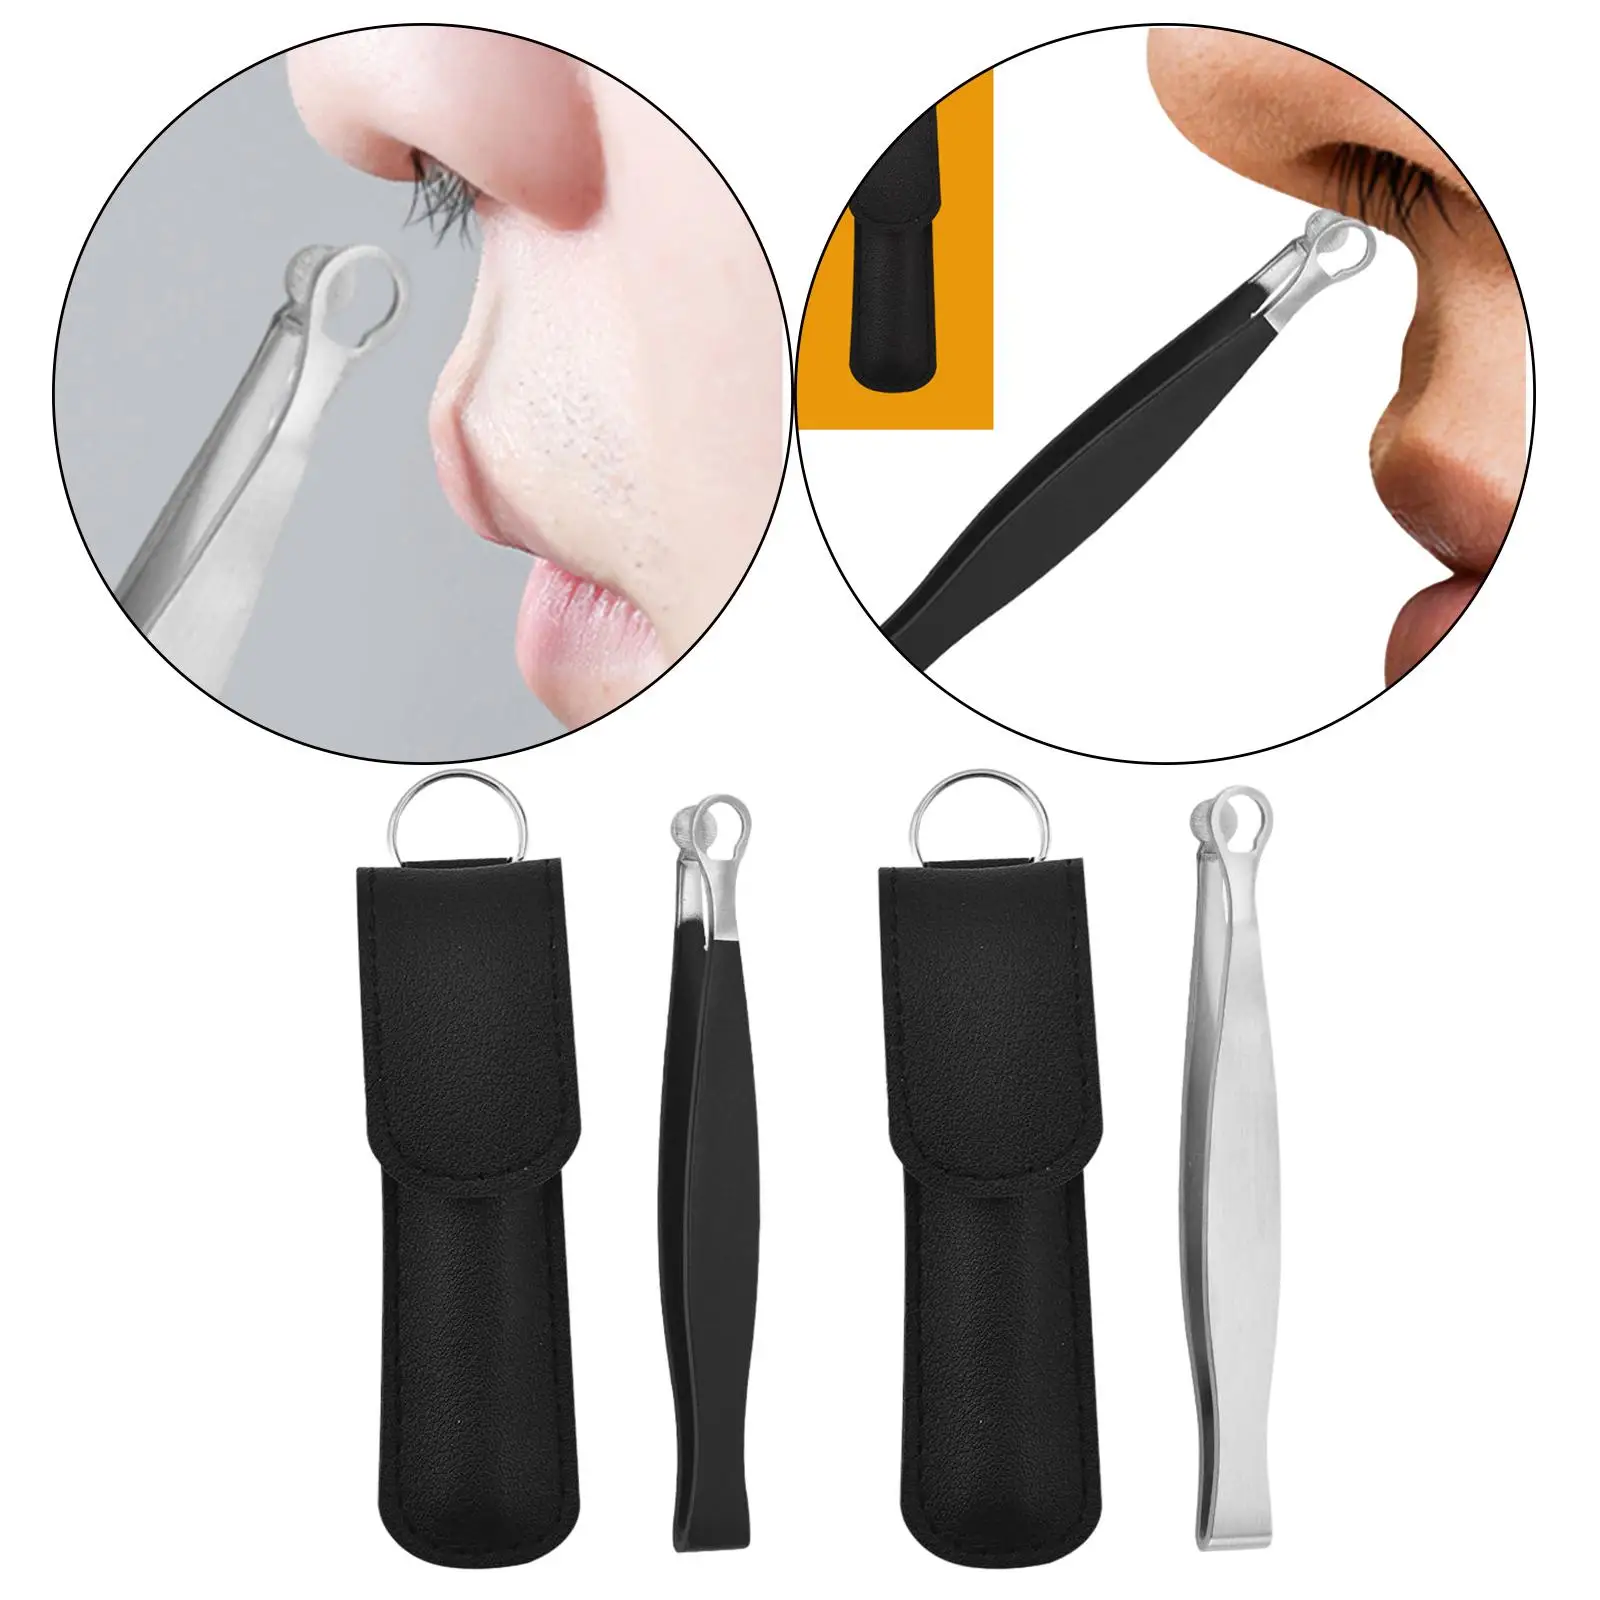 Nose Hair Trimming Tweezers Round Tip Portable for Brow Makeup Nose Cleaning